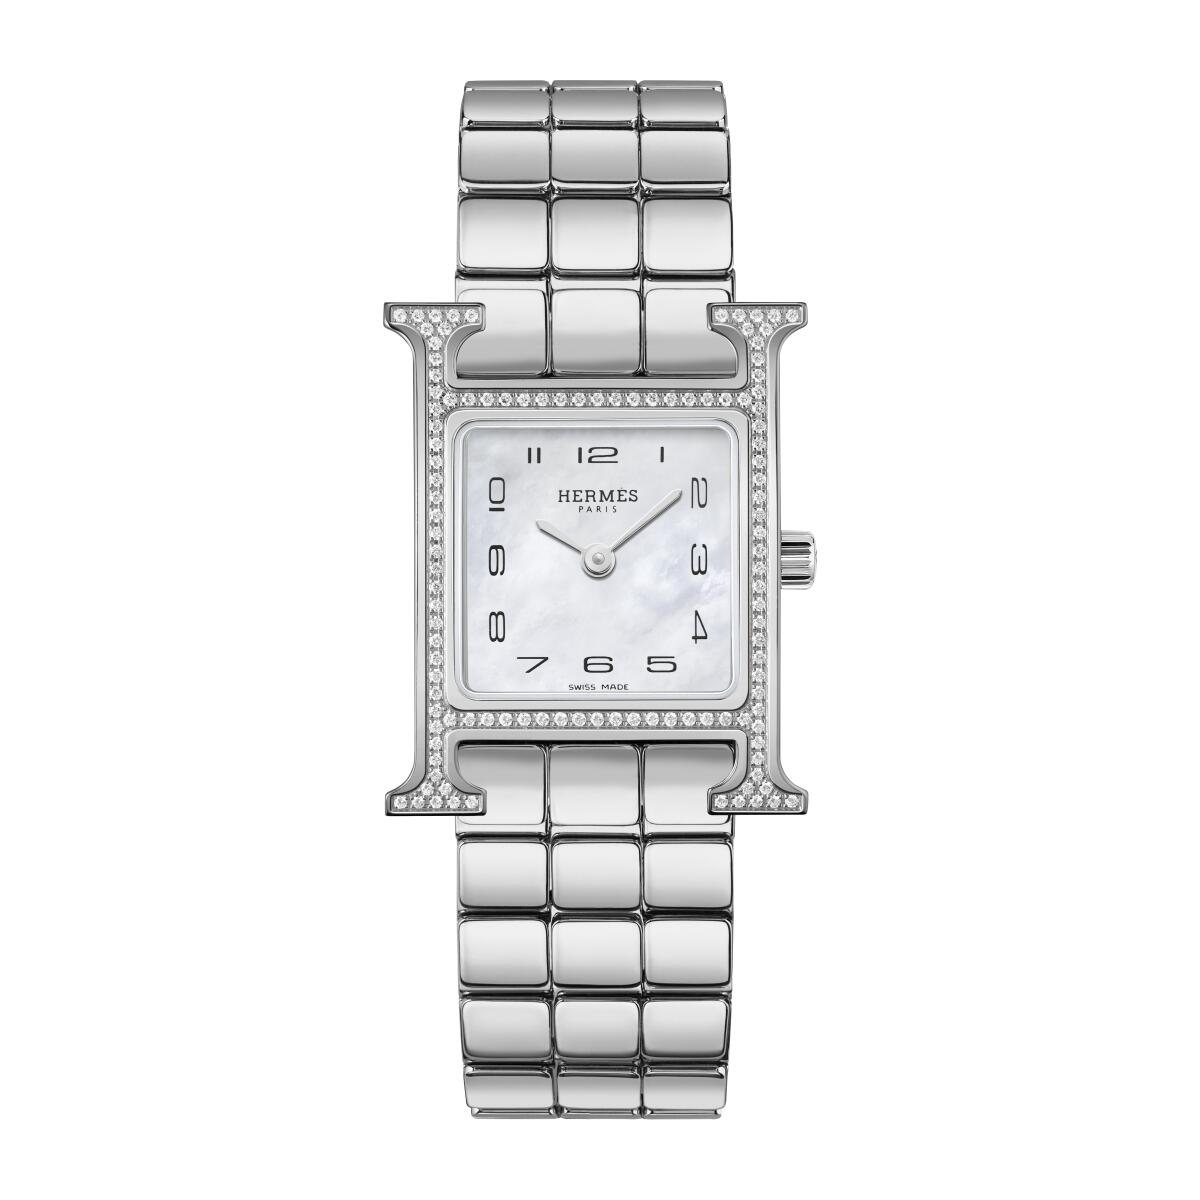 A photo of the Hermès Heure H steel watch with 114 feather-set diamonds and a natural white mother-of-pearl dial